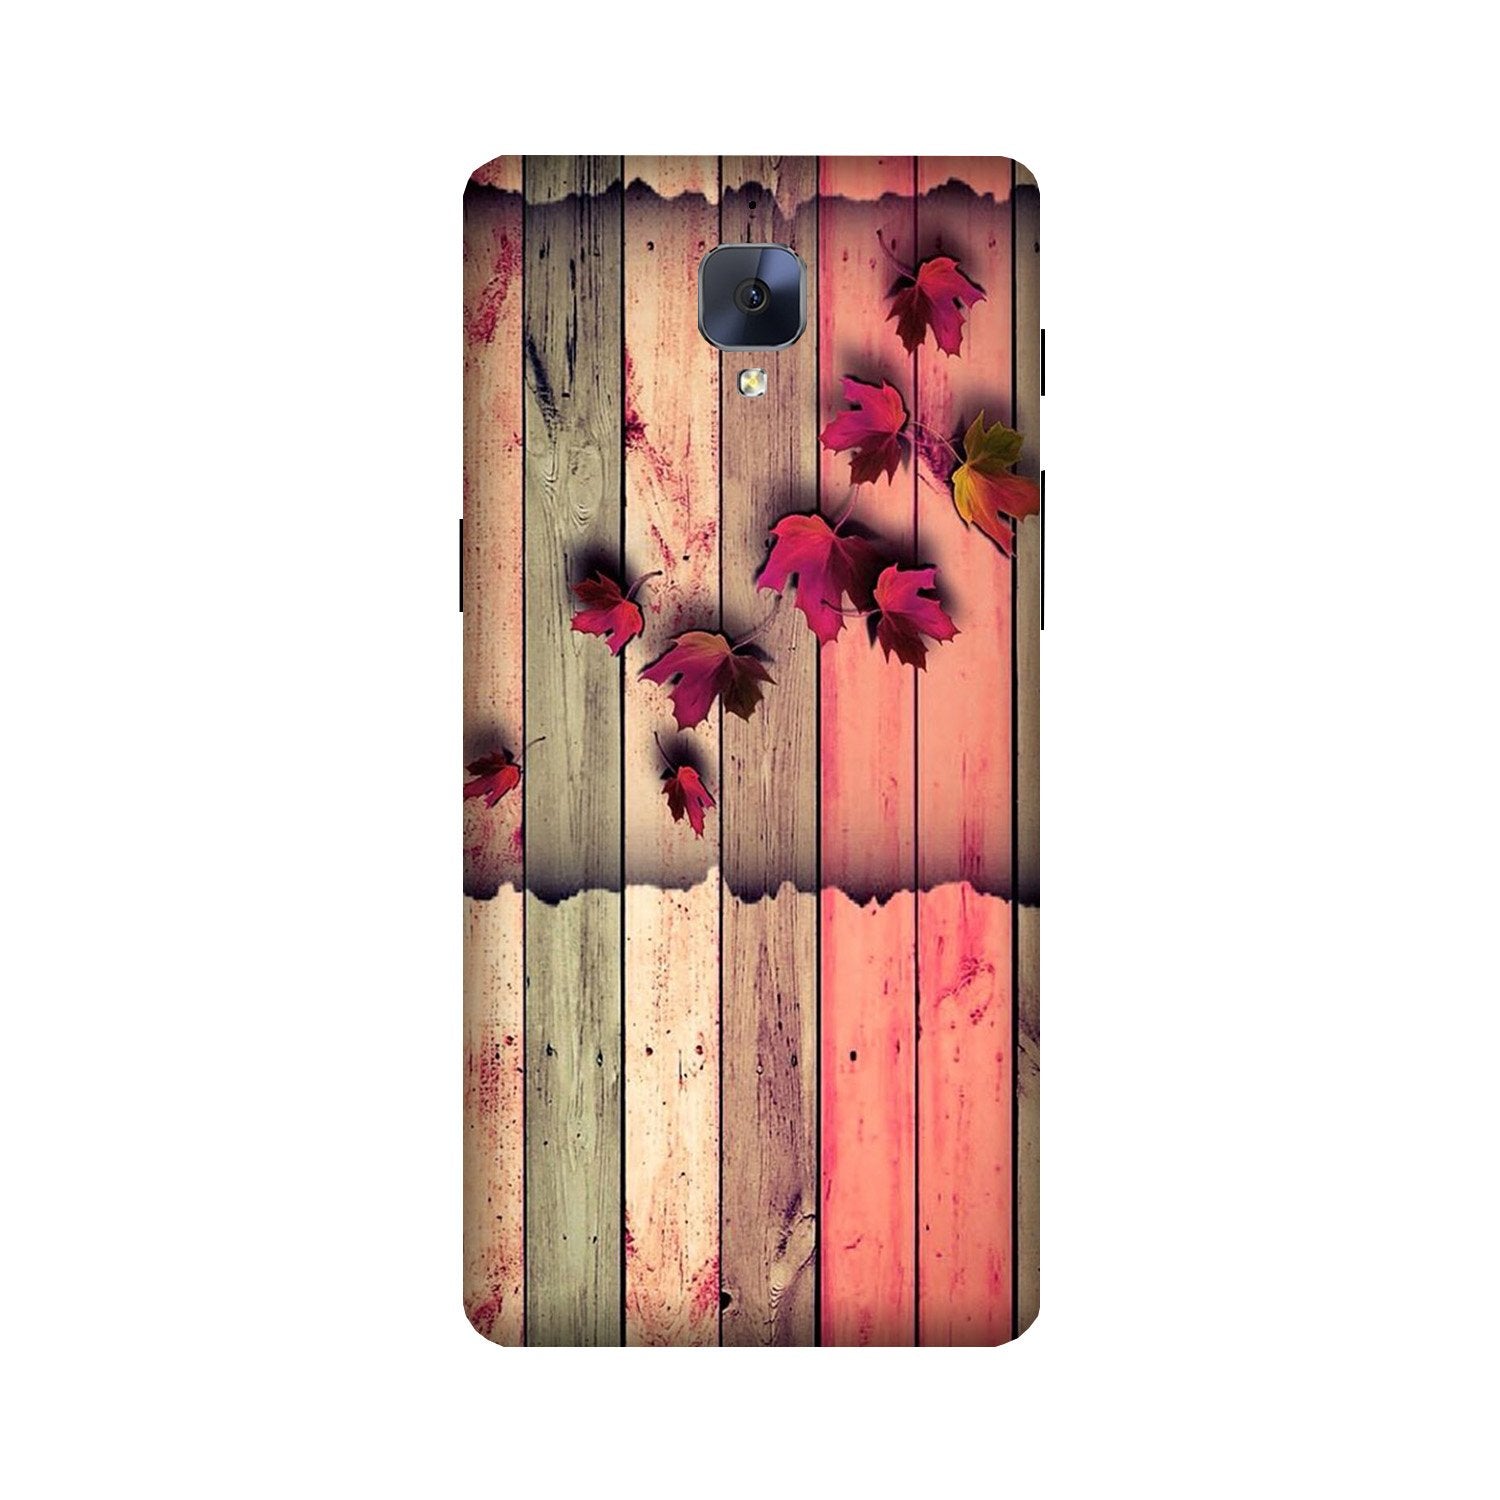 Wooden look2 Case for OnePlus 3/ 3T